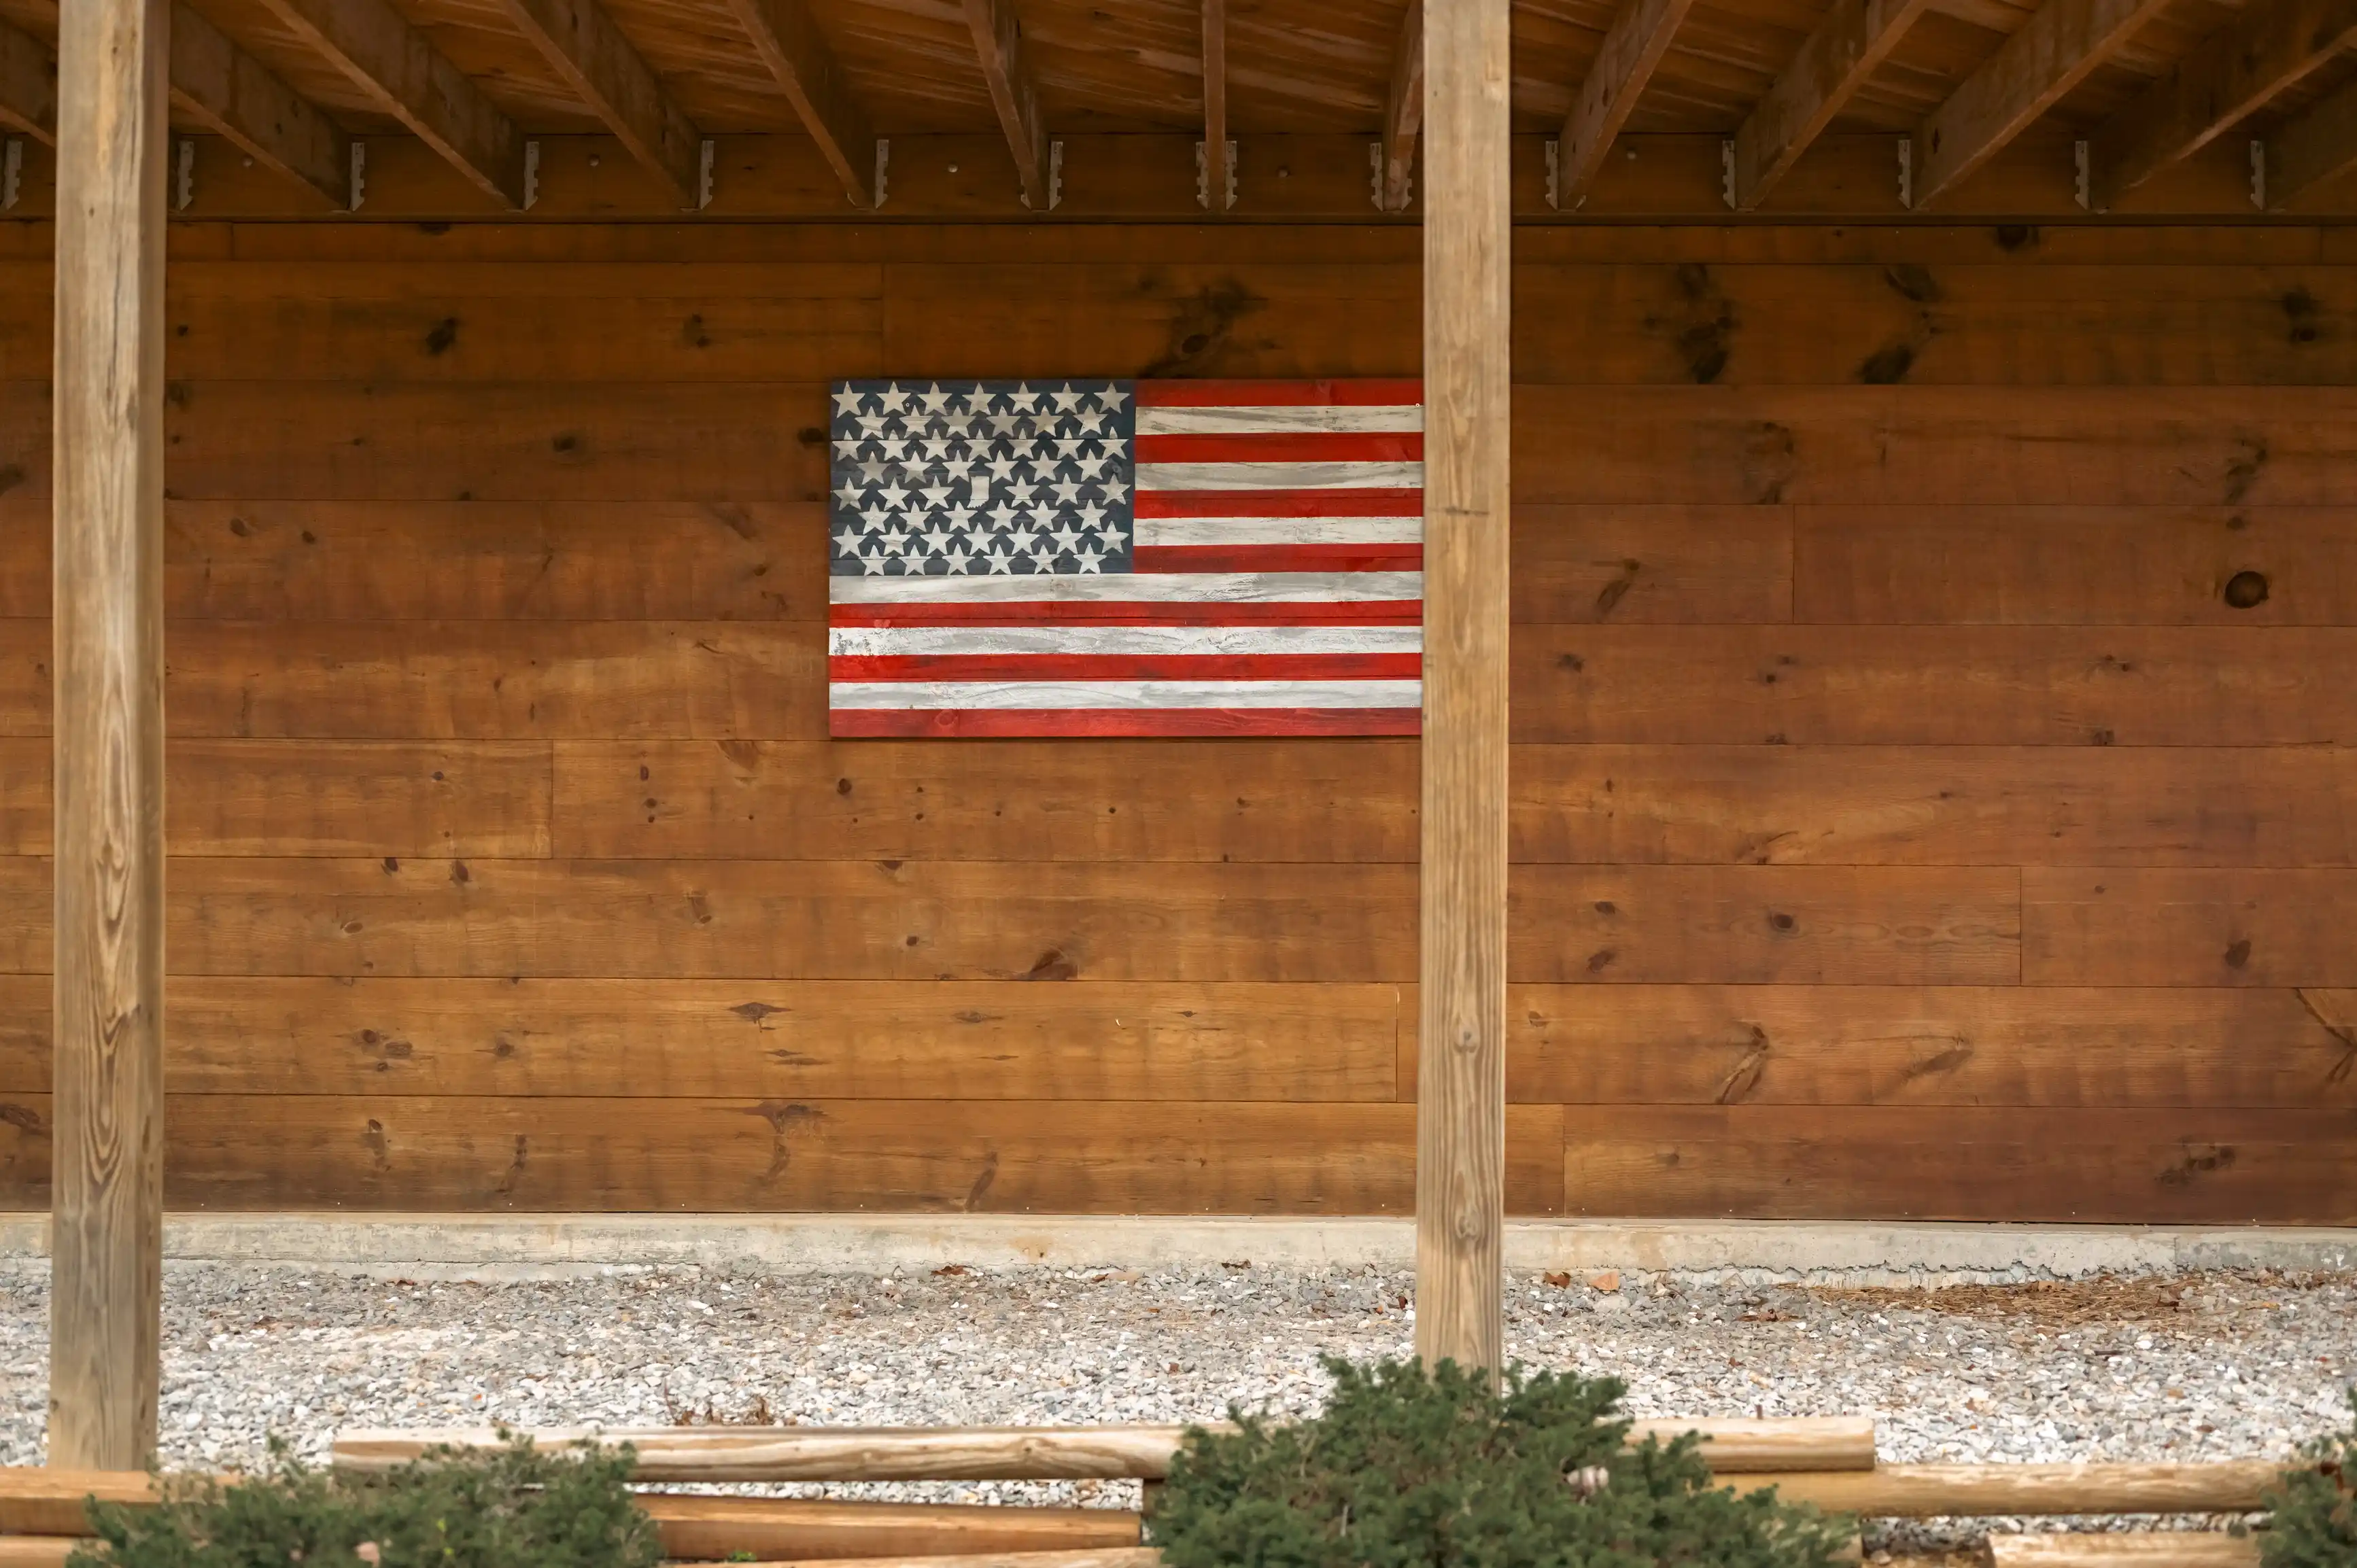 An American flag hanging on a wooden wall inside a covered area with wooden beams and a gravel ground.